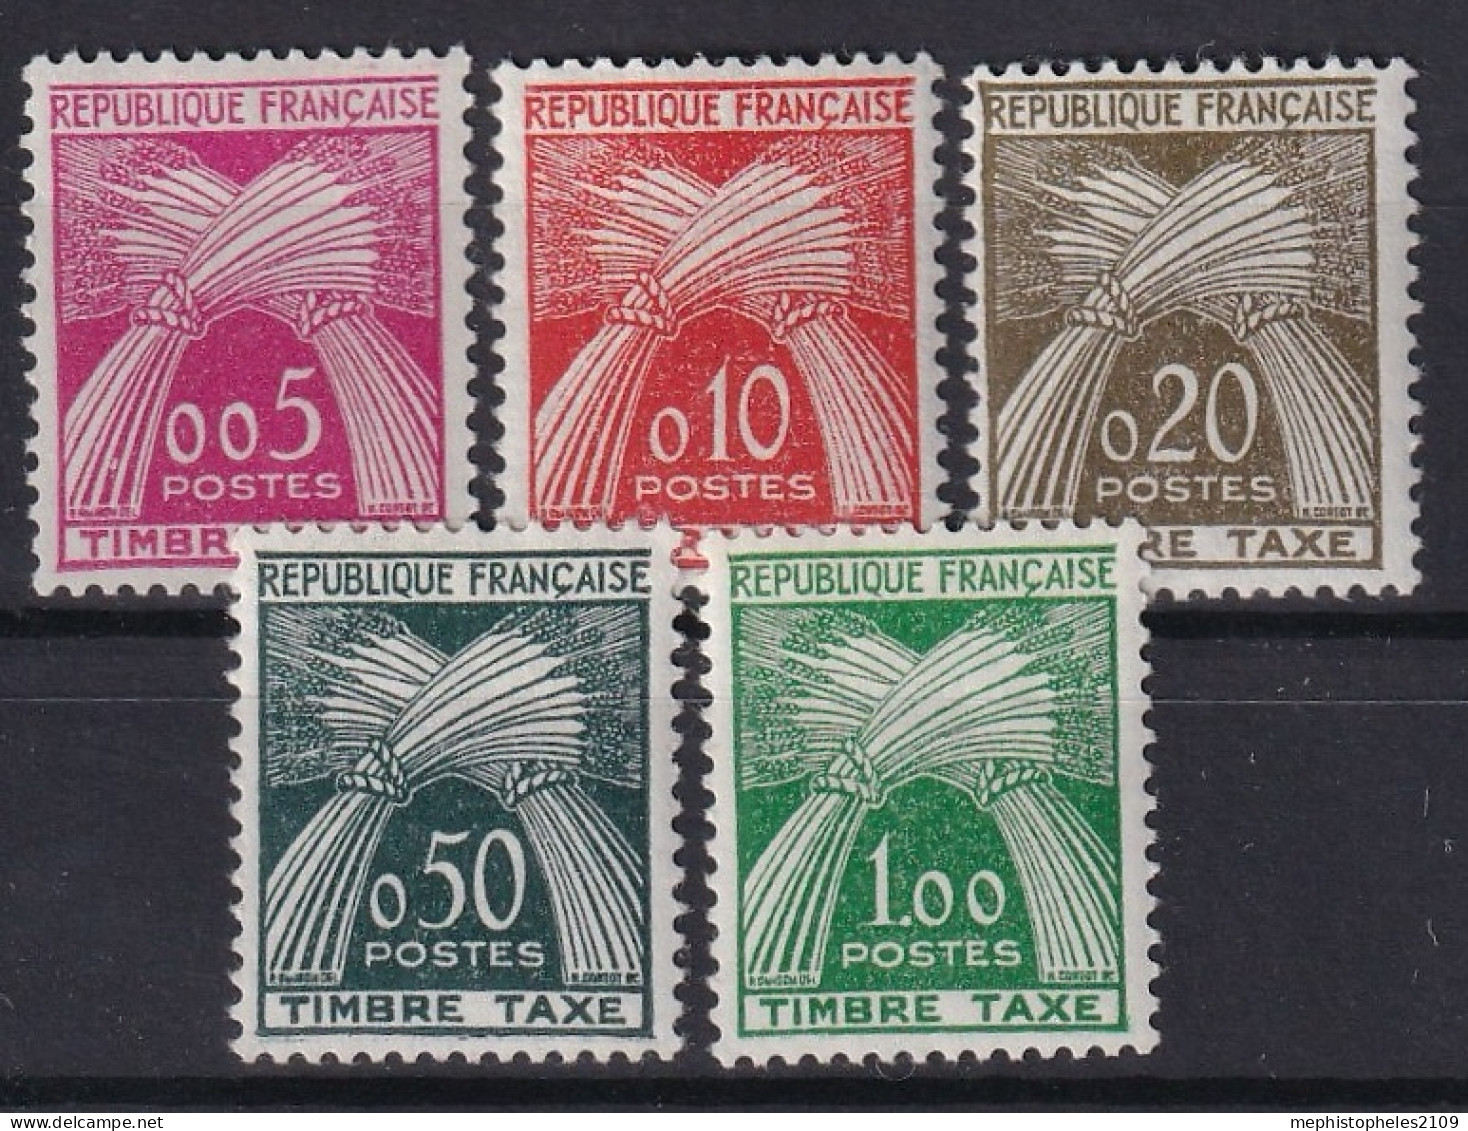 FRANCE 1960 - MNH - YT 90-94 - Timbres Taxe  - 1960-.... Mint/hinged